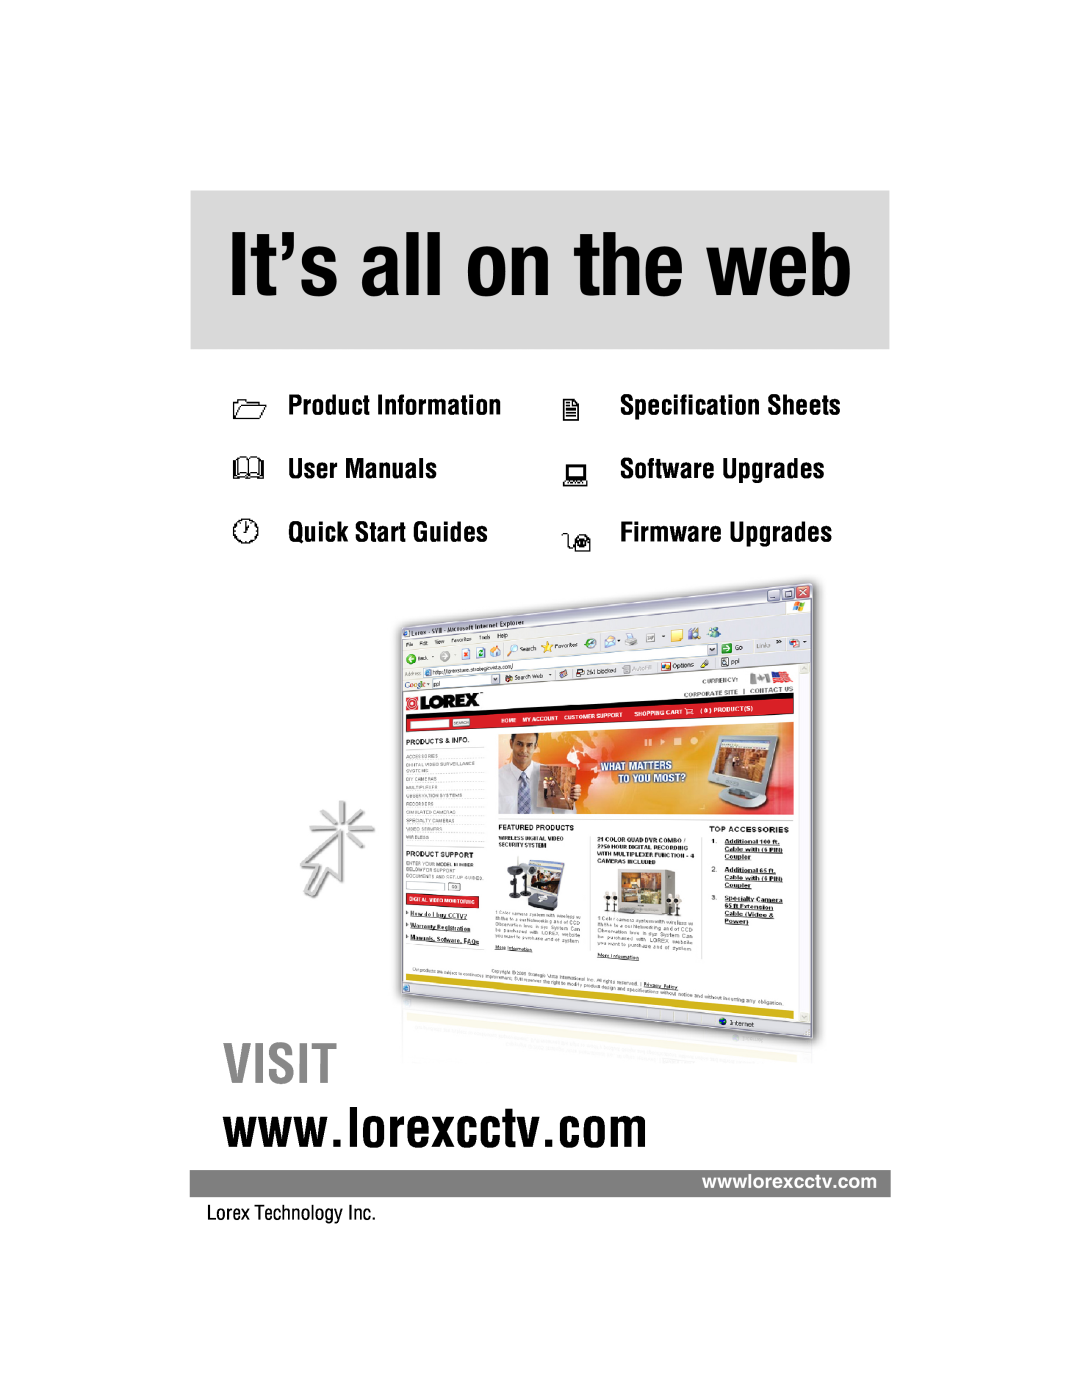 LOREX Technology SG 19LD804-161 Product Information, It’s all on the web, Visit, Quick Start Guides, Software Upgrades 